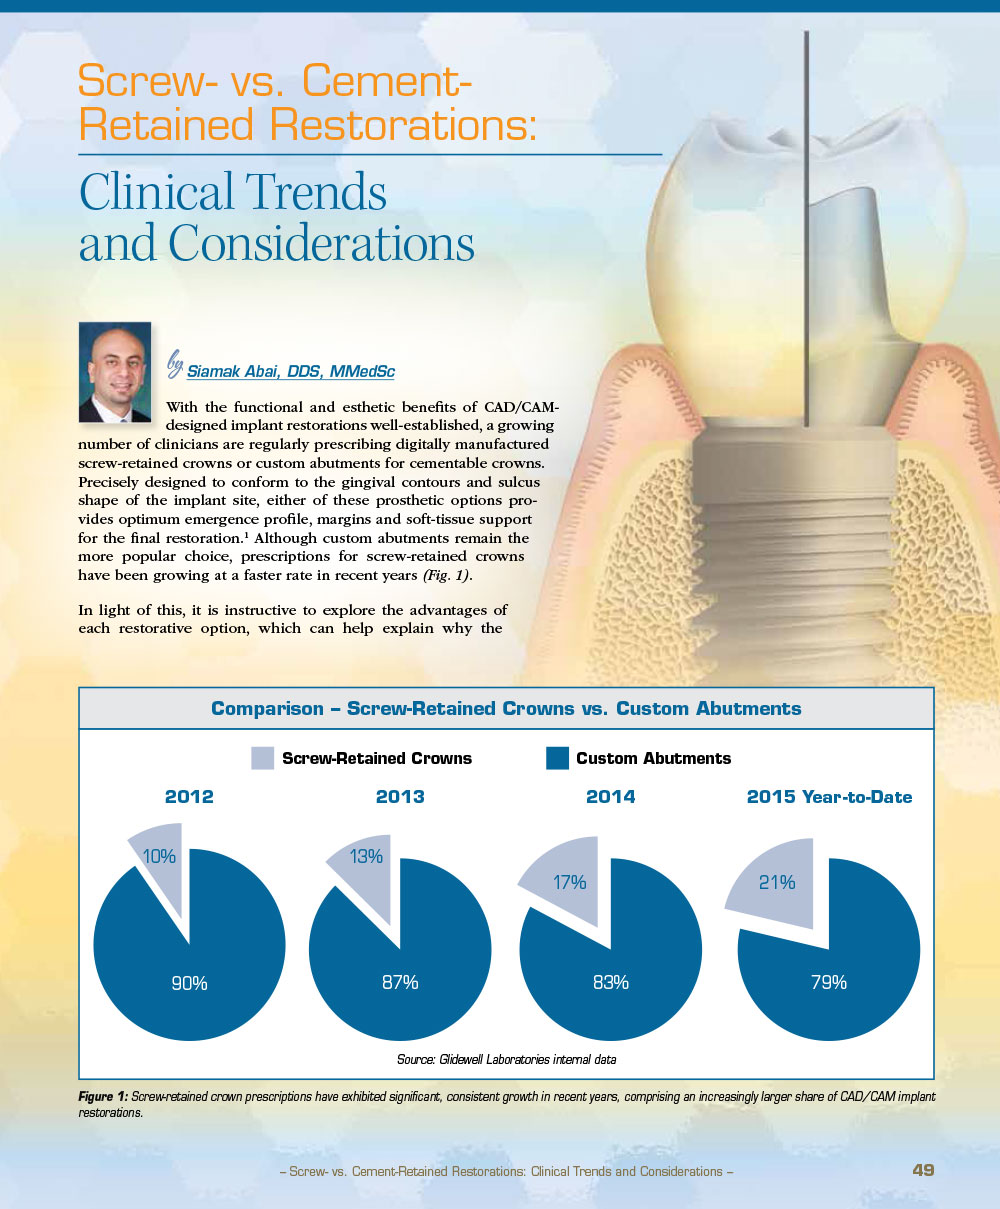 Screw- vs. Cement- Retained Restorations: Clinical Trends and Considerations